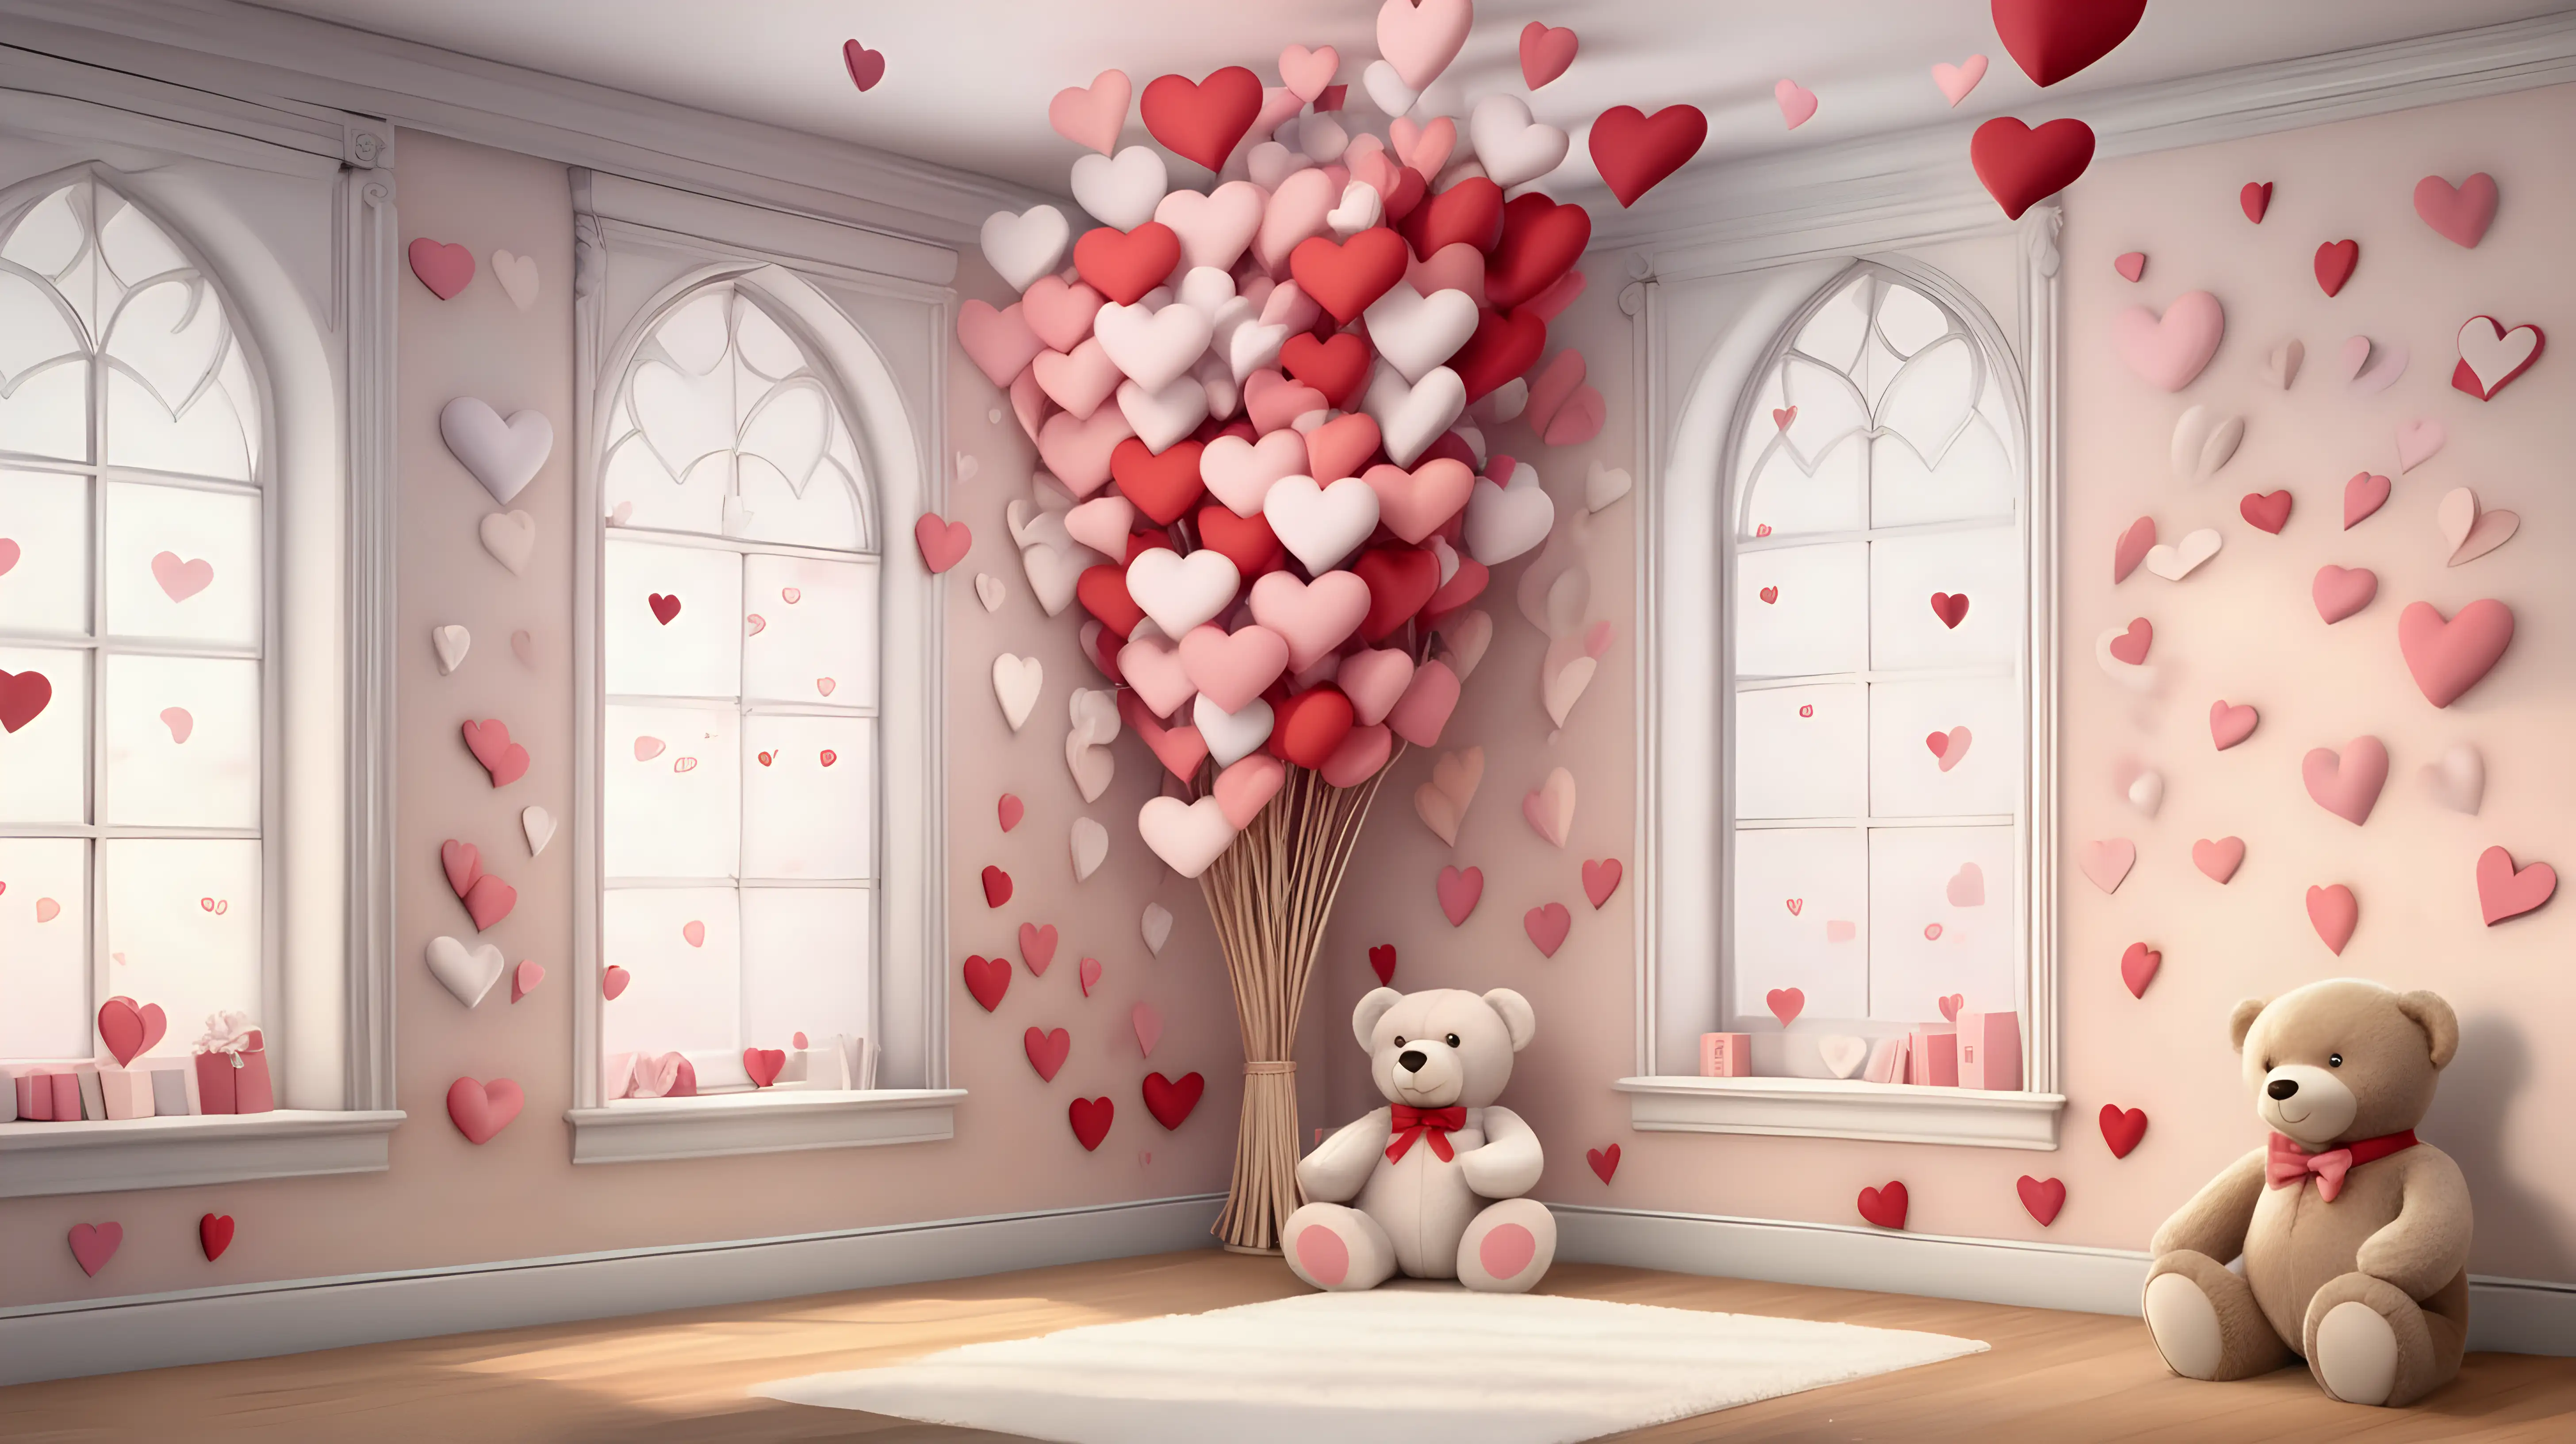 A blank space in the middle, framed by love-infused hearts and cuddly teddy bears, ready for your romantic prose.